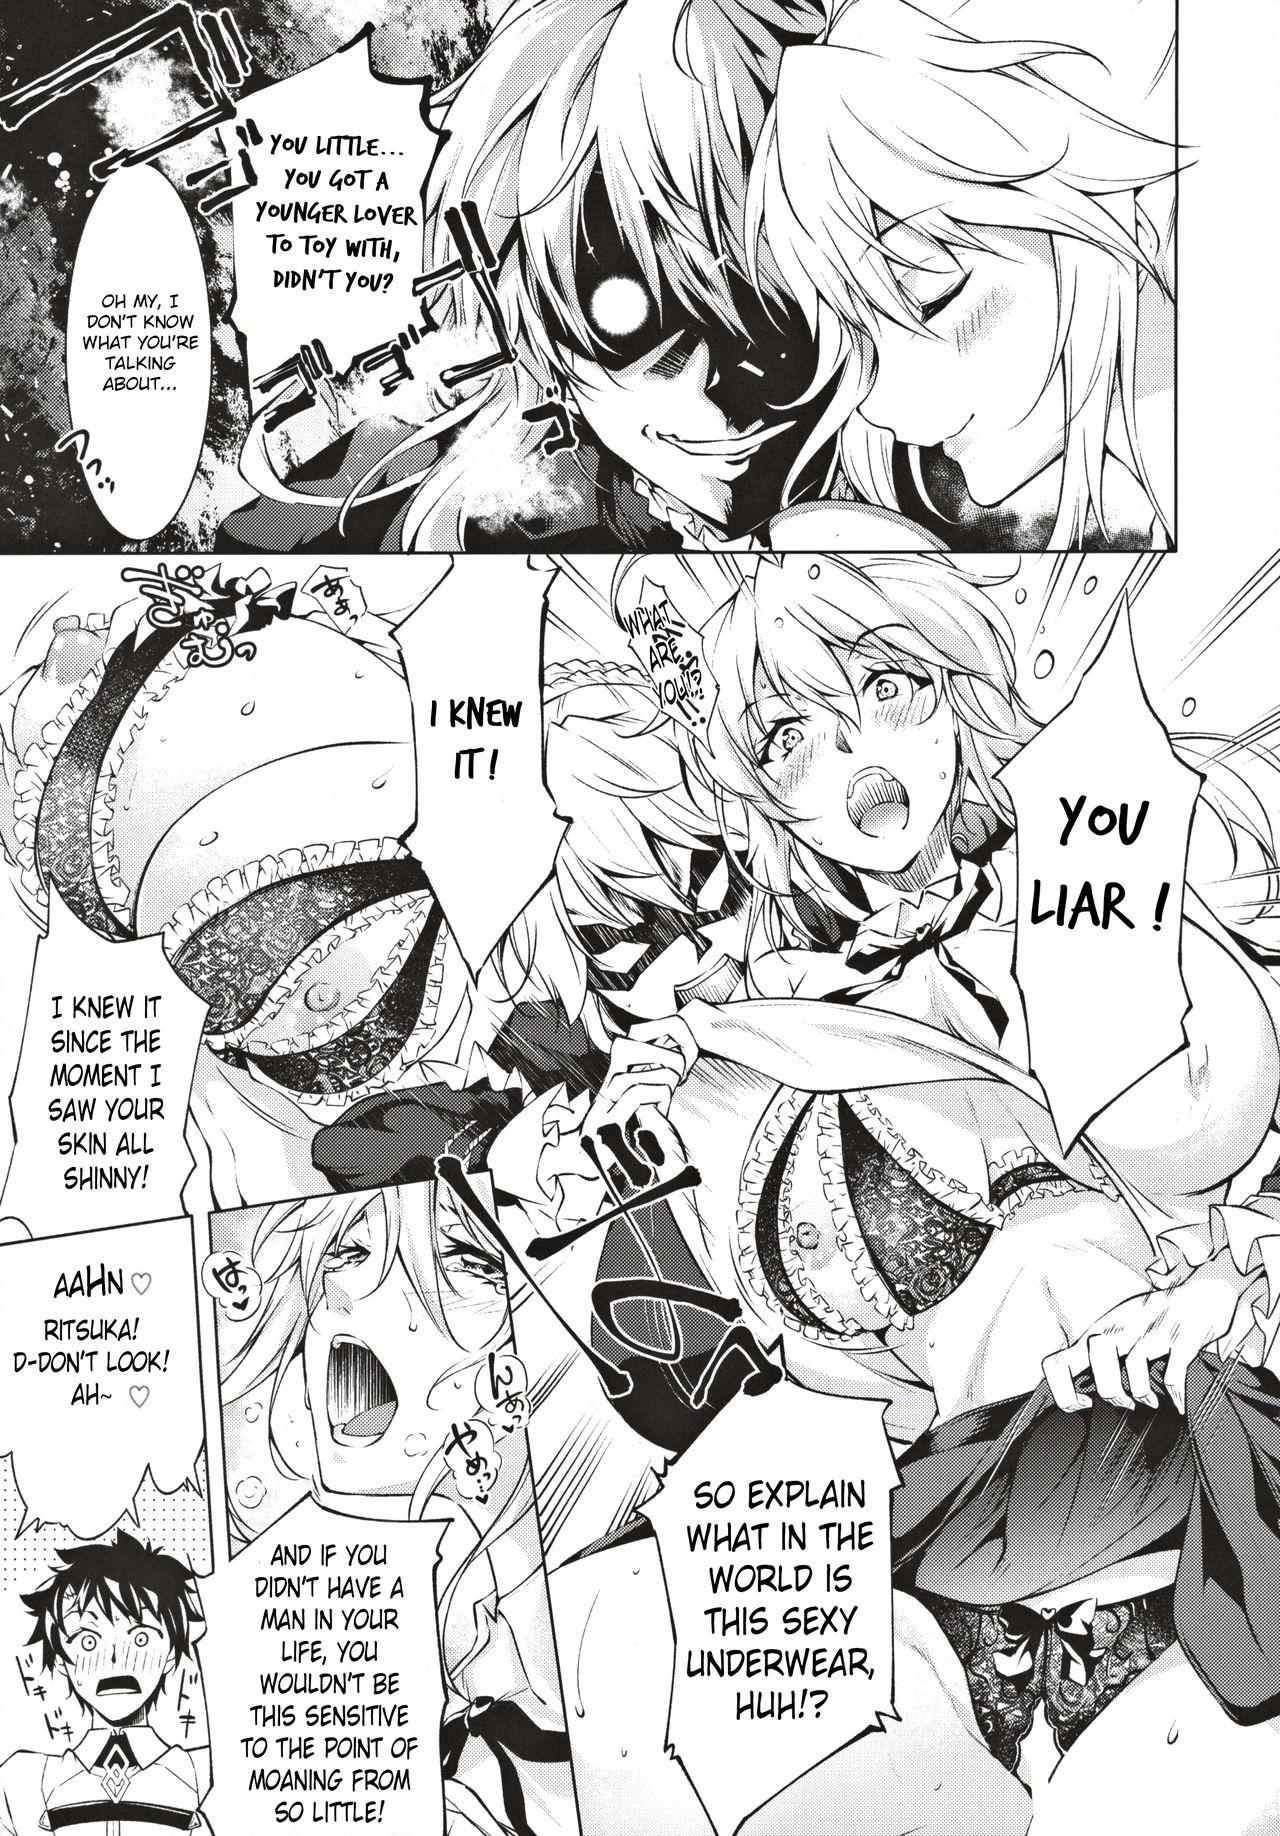 Dick Sucking Pendra Shimai no Seijijou | The Pendragon twin sisters' sexual situation - Fate grand order Amante - Page 6